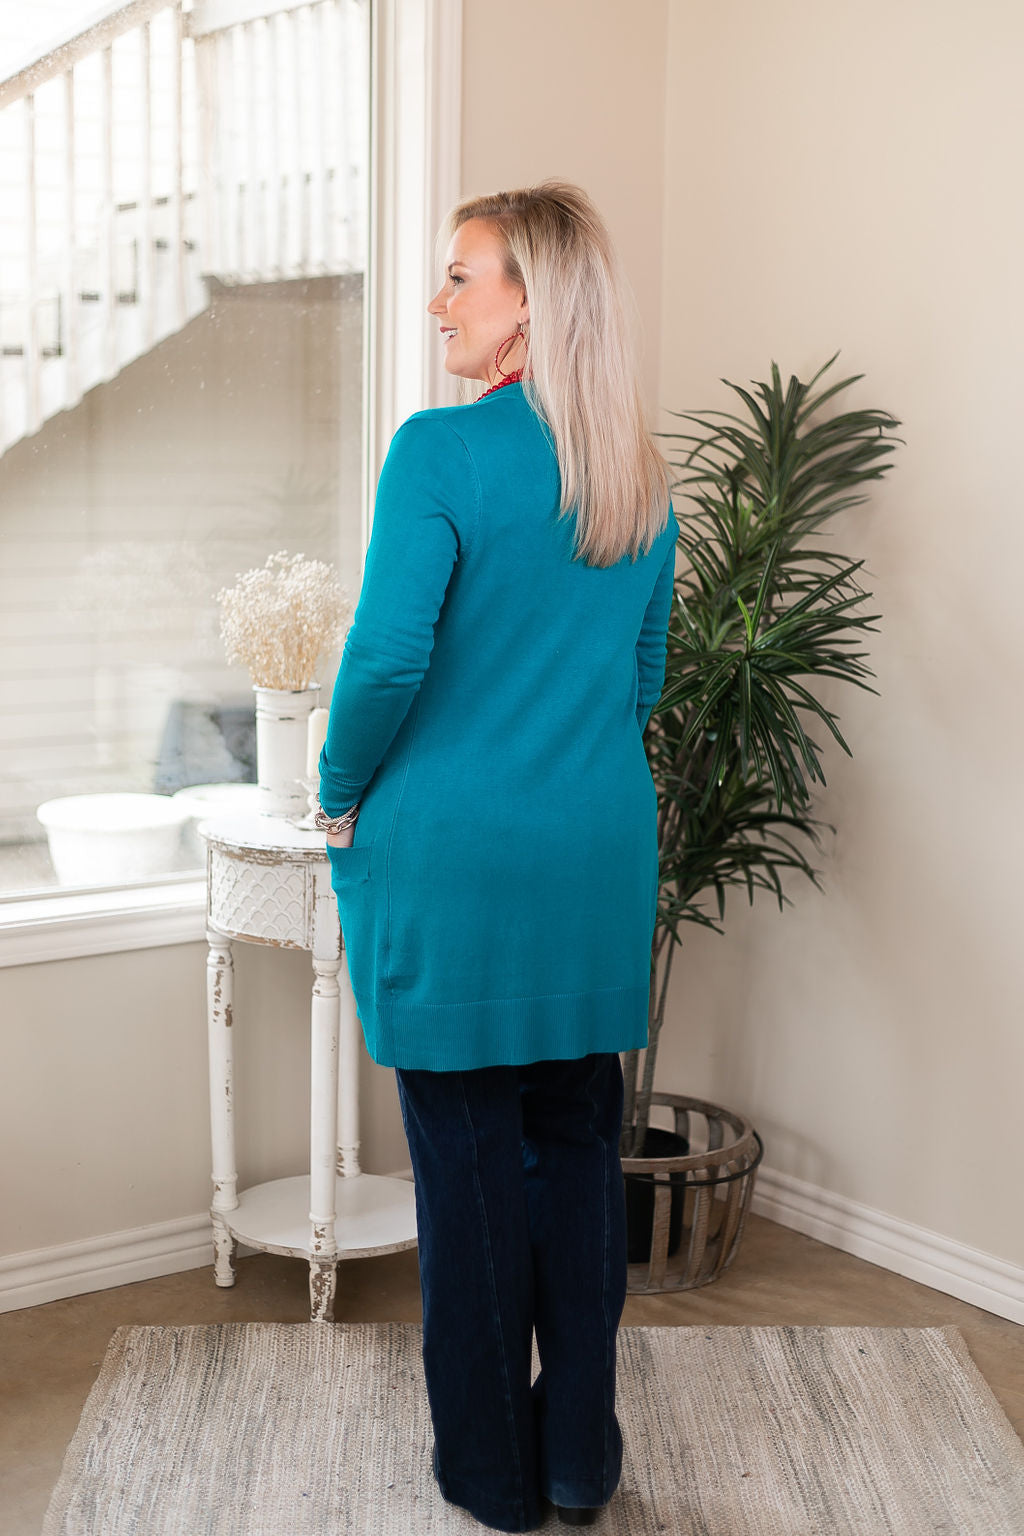 Last Chance Size Small | Beat The Chill Basic Knit Cardigan in Teal Turquoise - Giddy Up Glamour Boutique